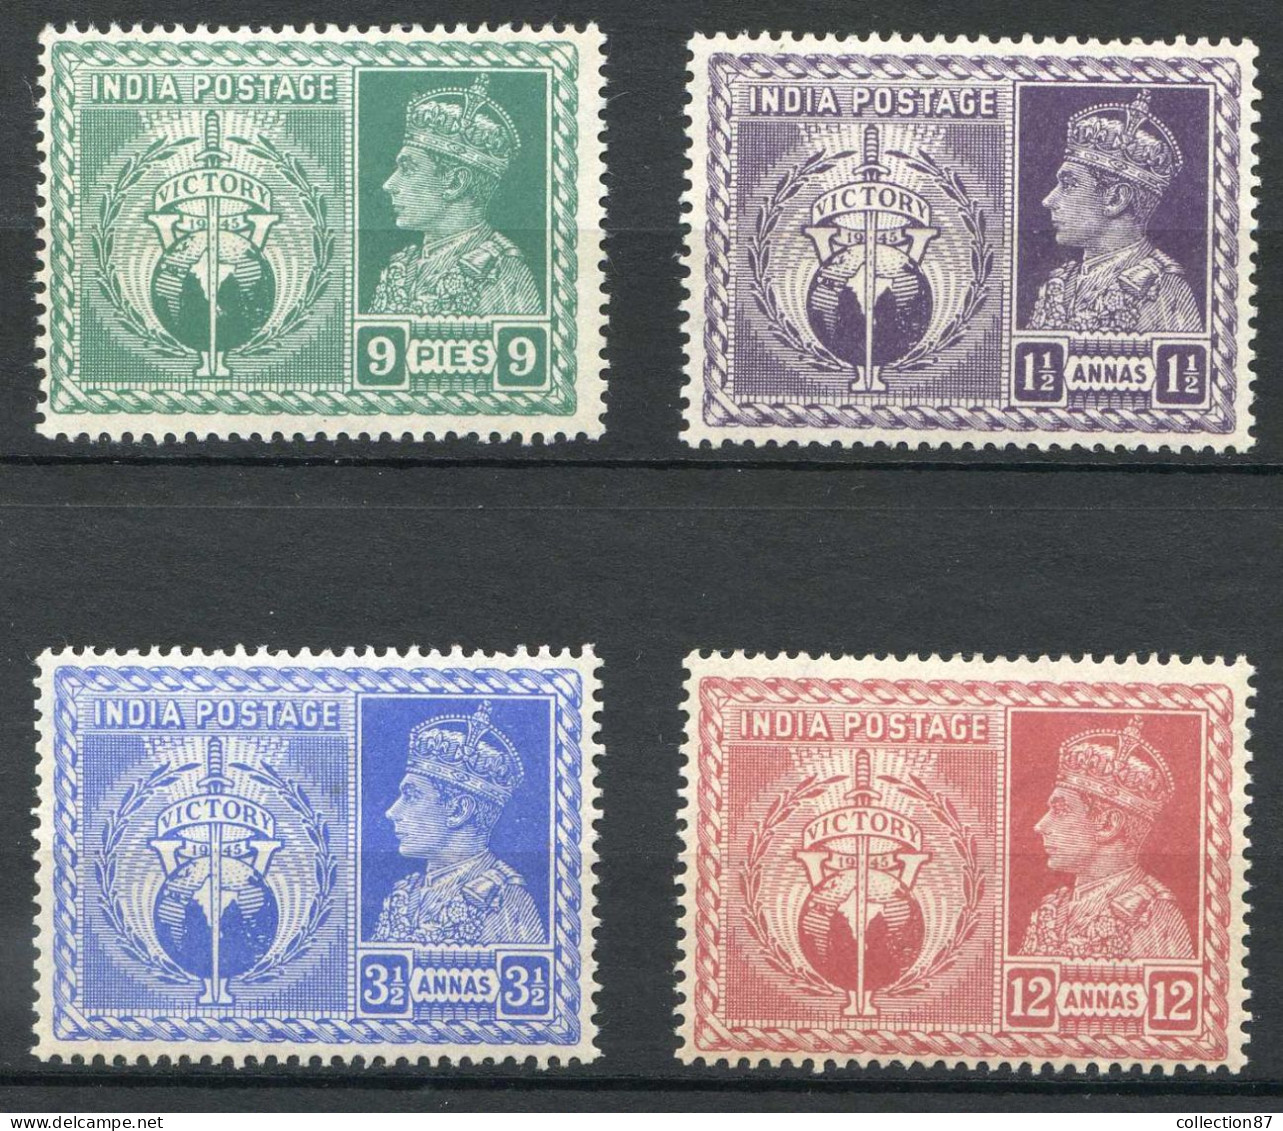 REF 001 > INDE ANGLAISE < N° 174 à 177 * * < Neuf Luxe -- MNH * * -- George VI < Victoire - 1936-47 Roi Georges VI